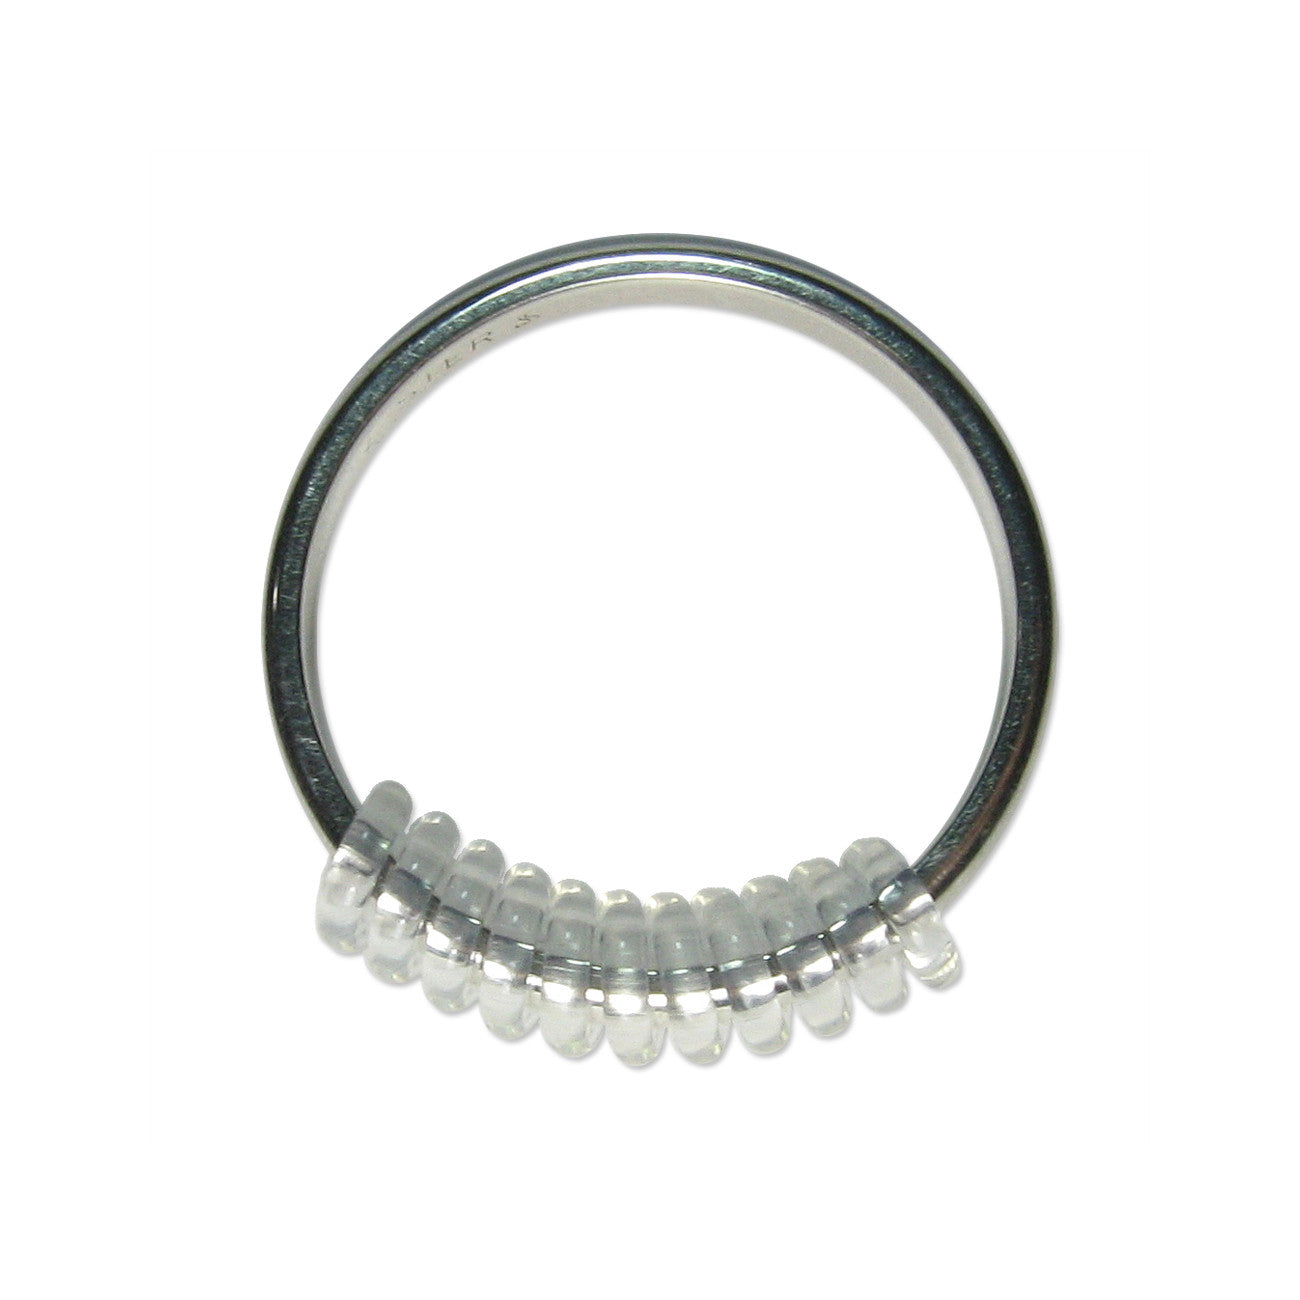 Ringslinky 6 Pack Ring Guard /ring Size Reducer 